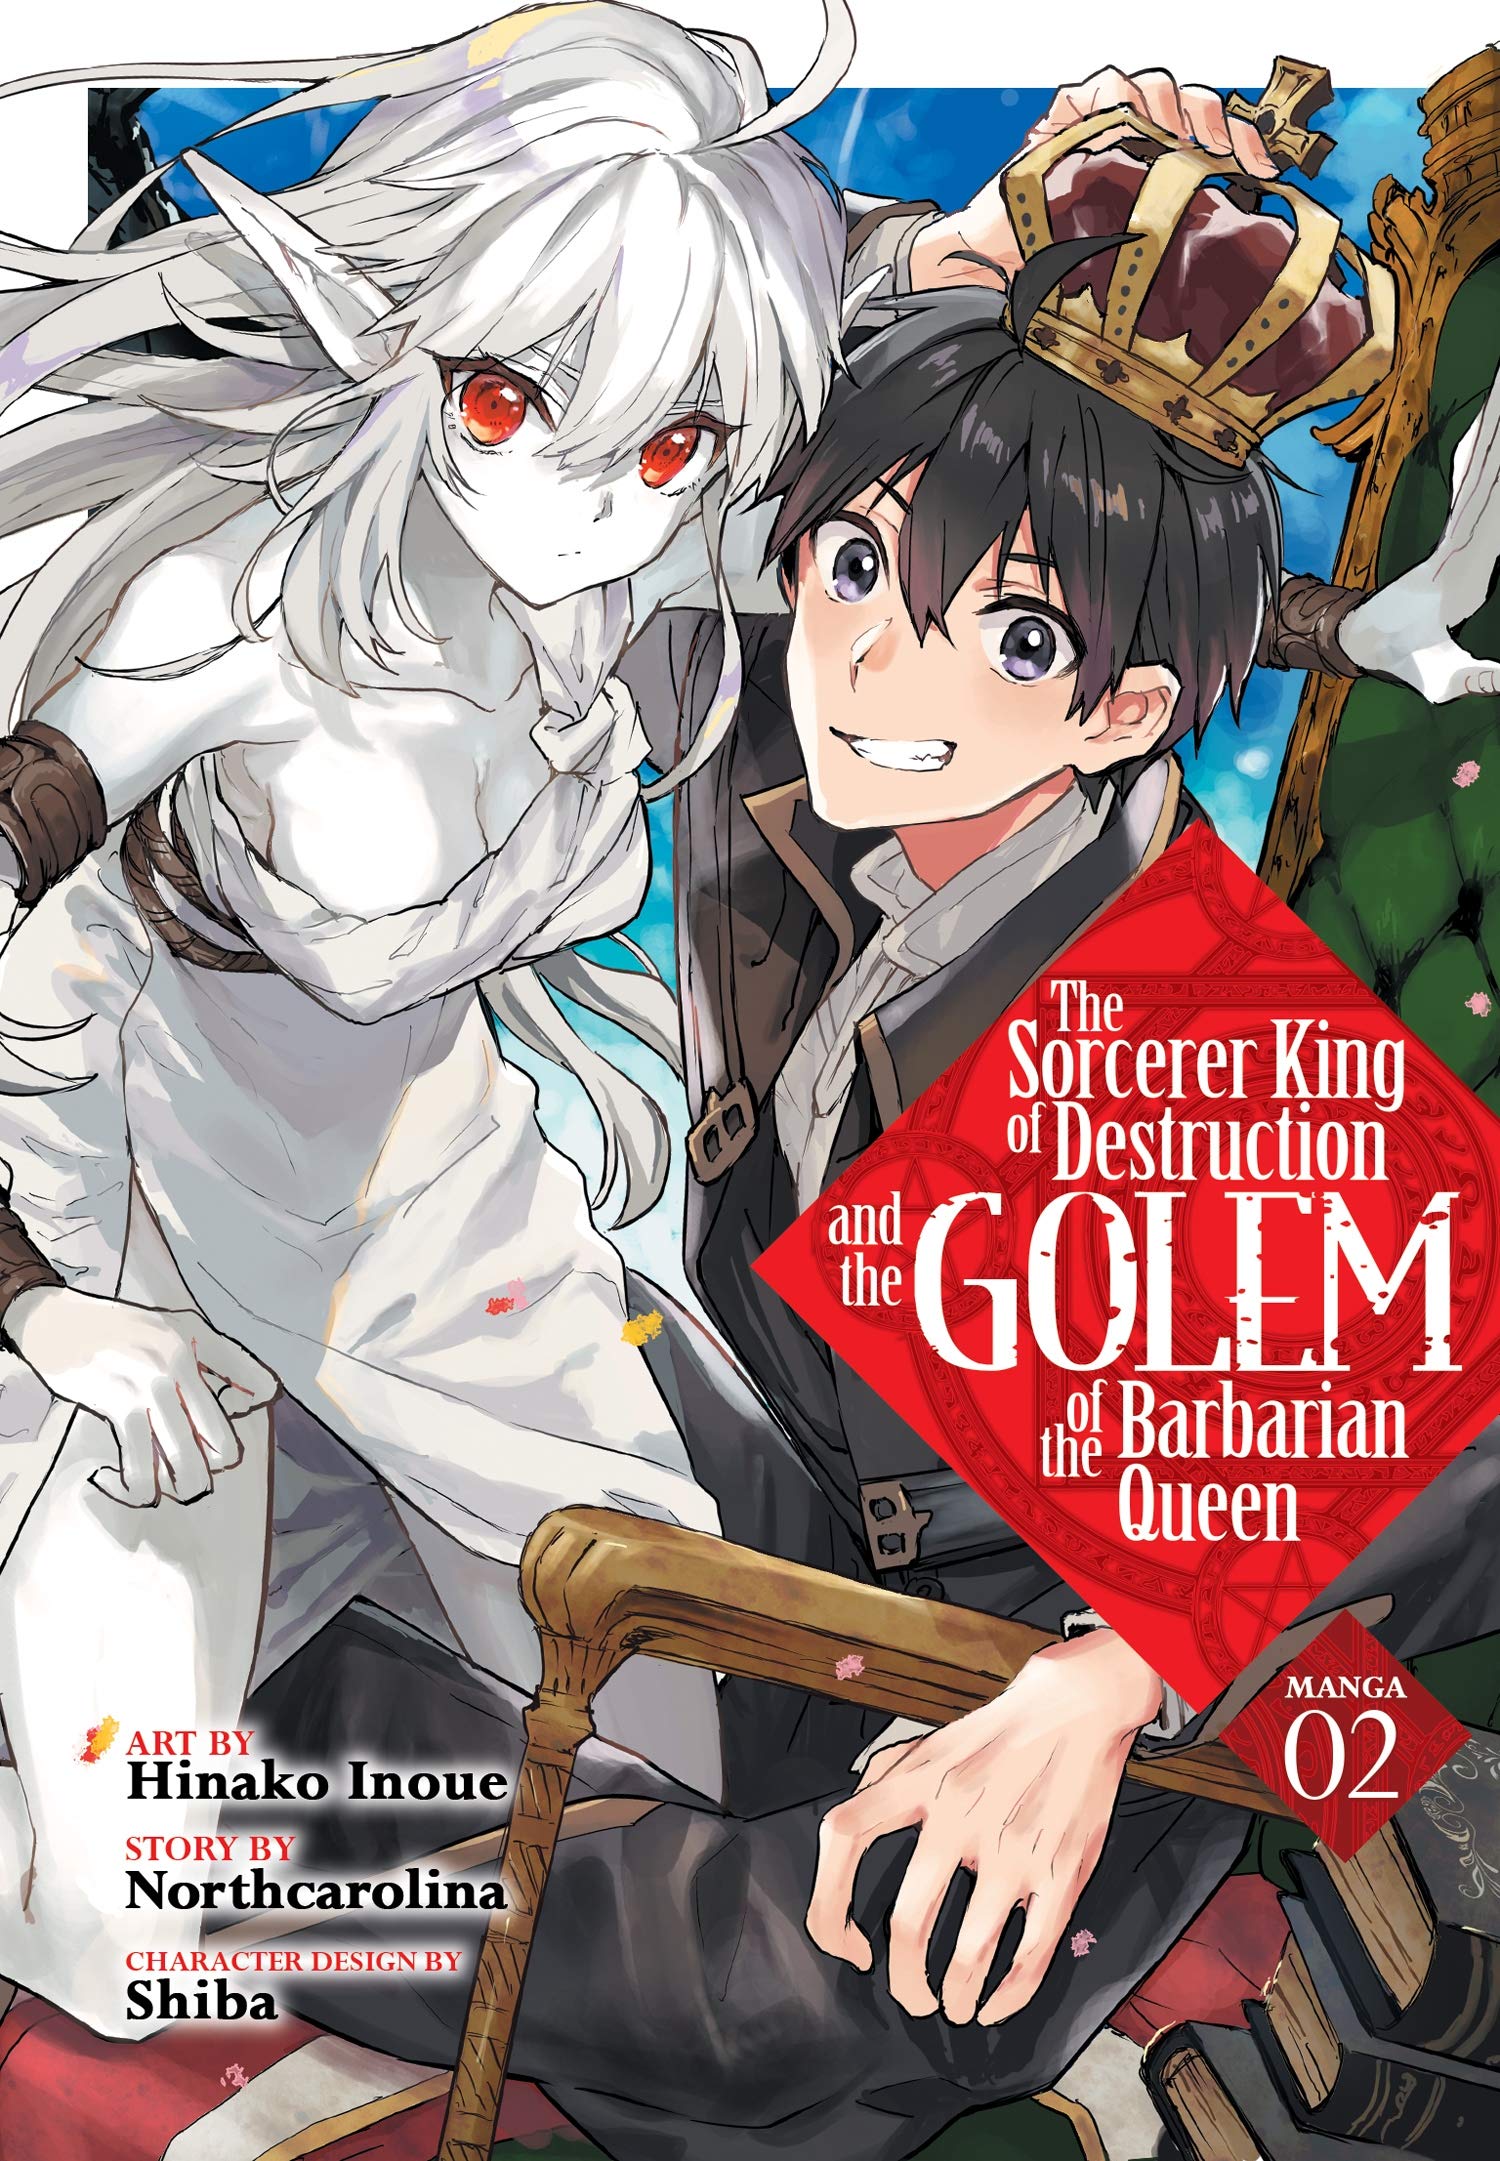 The Sorcerer King of Destruction and the Golem of the Barbarian Queen - Volume 2 | Hinako Inoue, Northcarolina